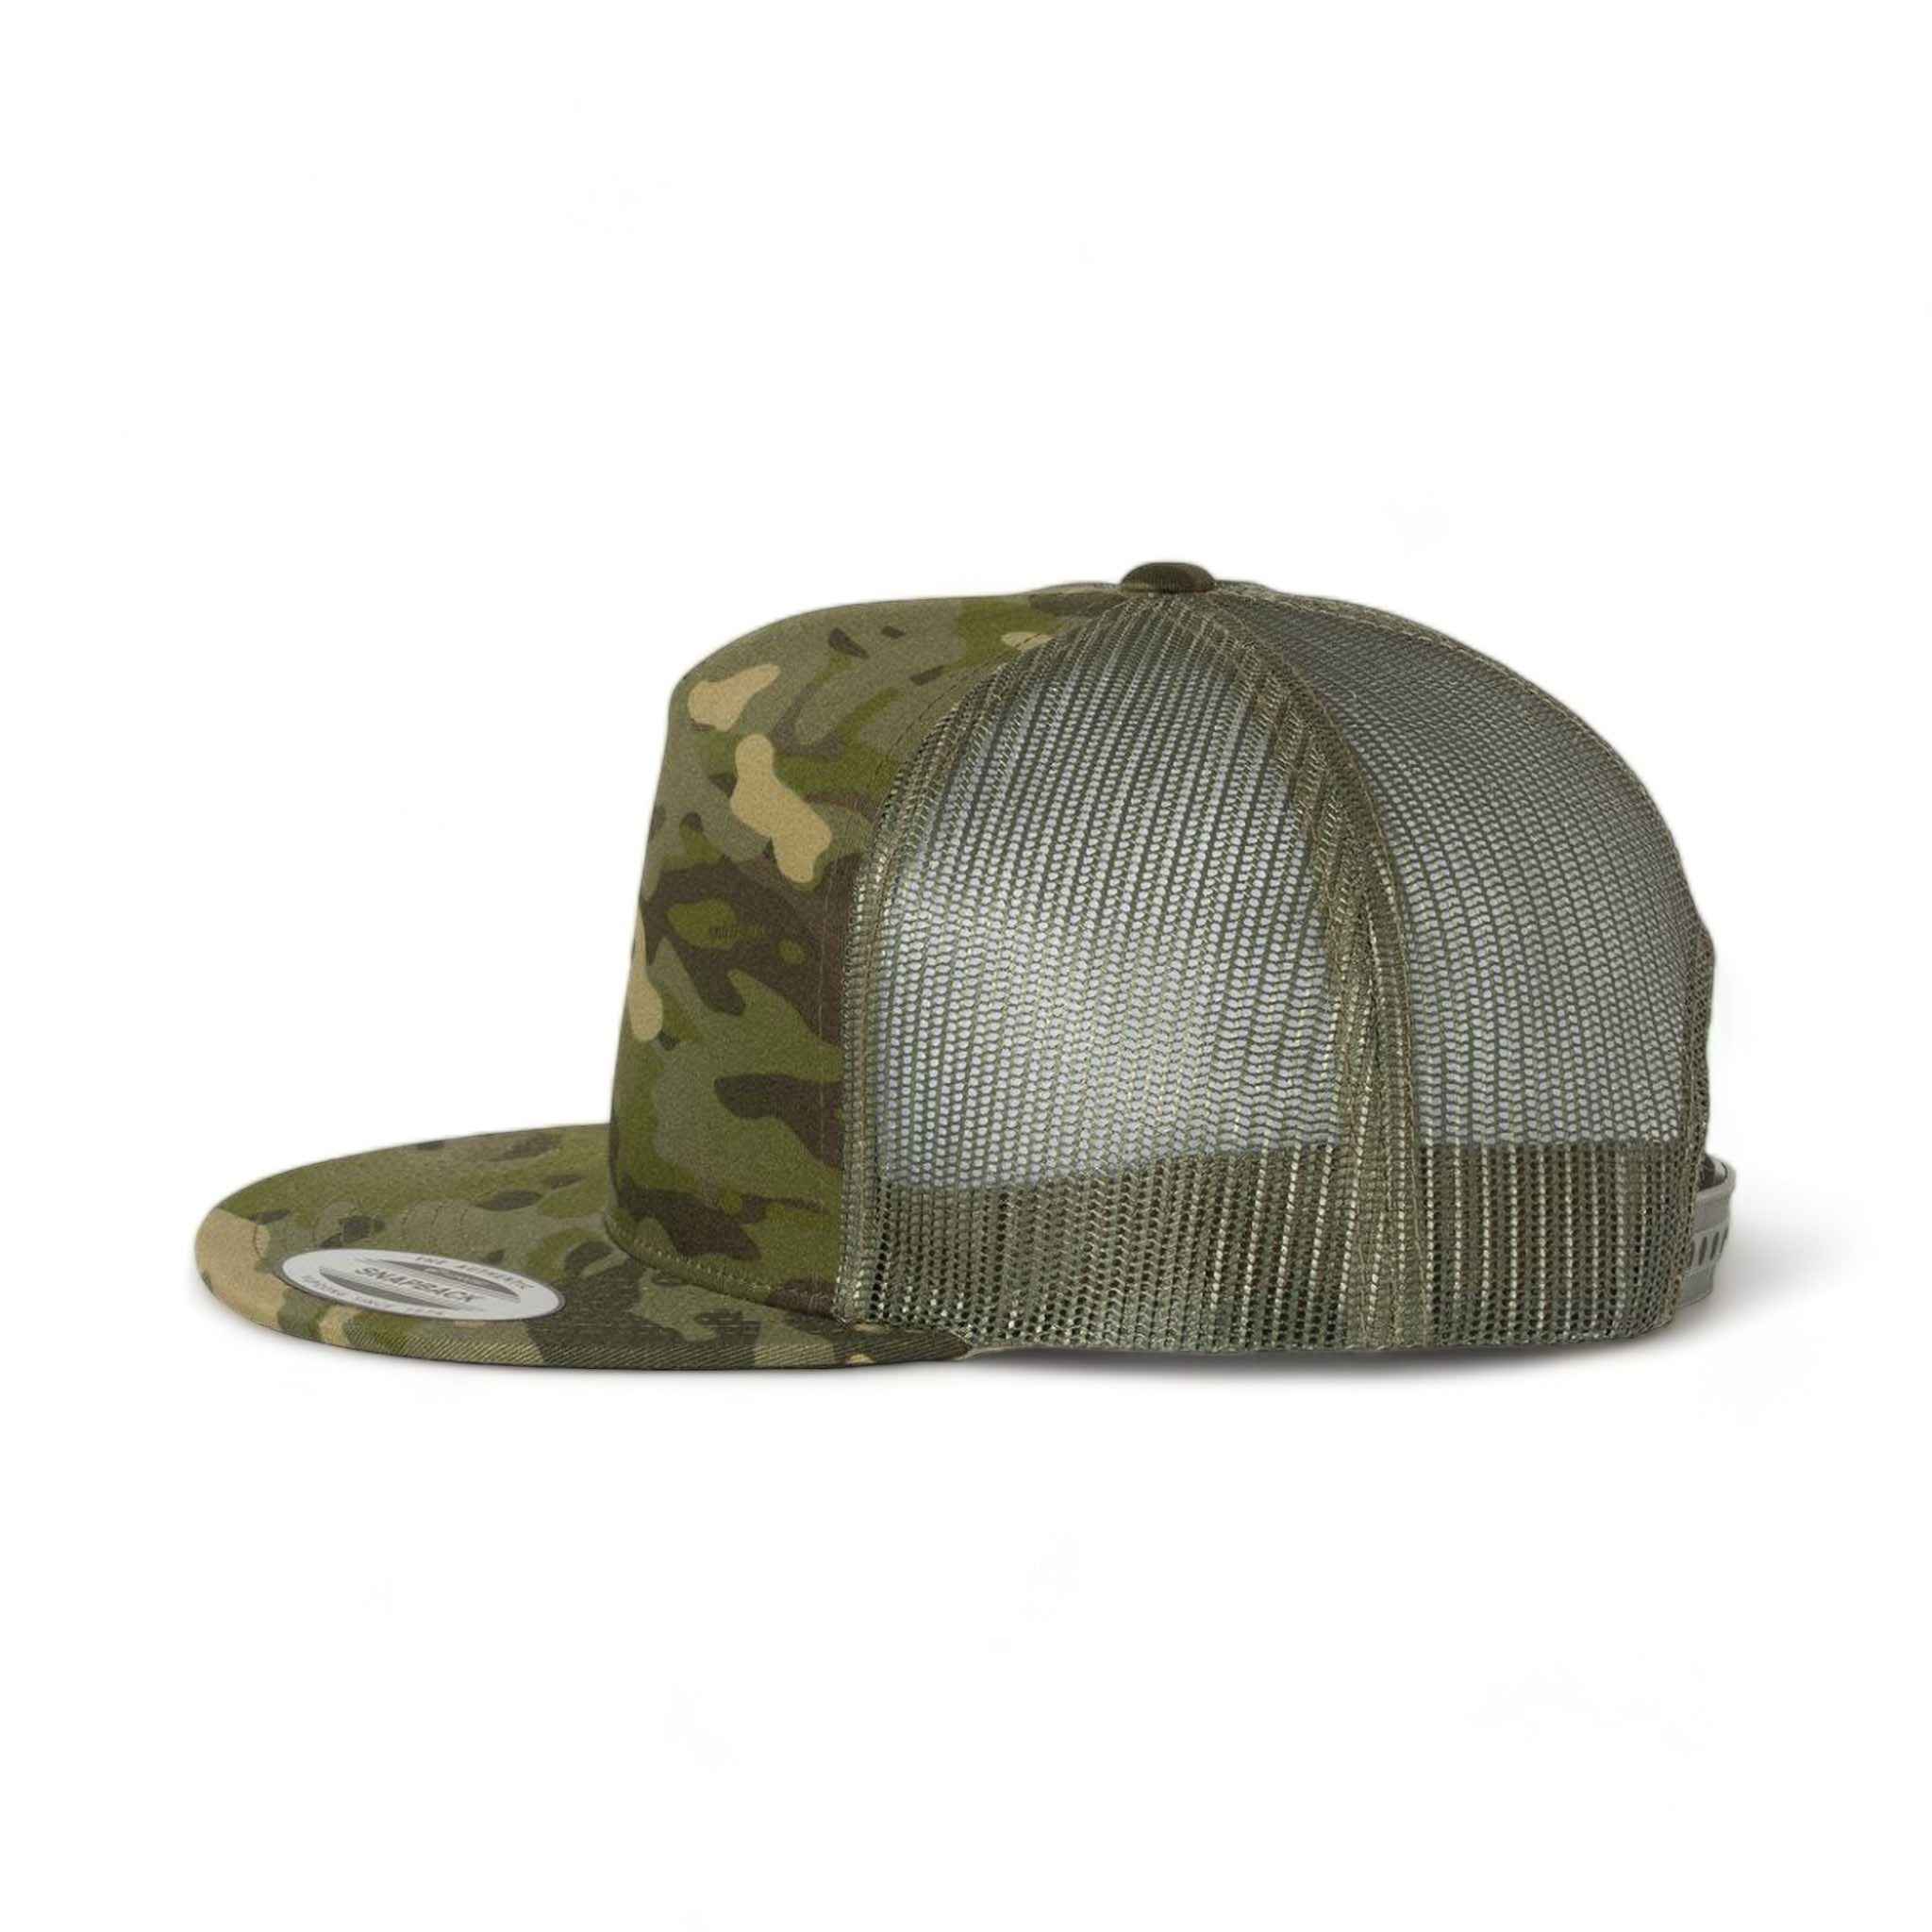 Side view of YP Classics 6006 custom hat in multicam tropic and green